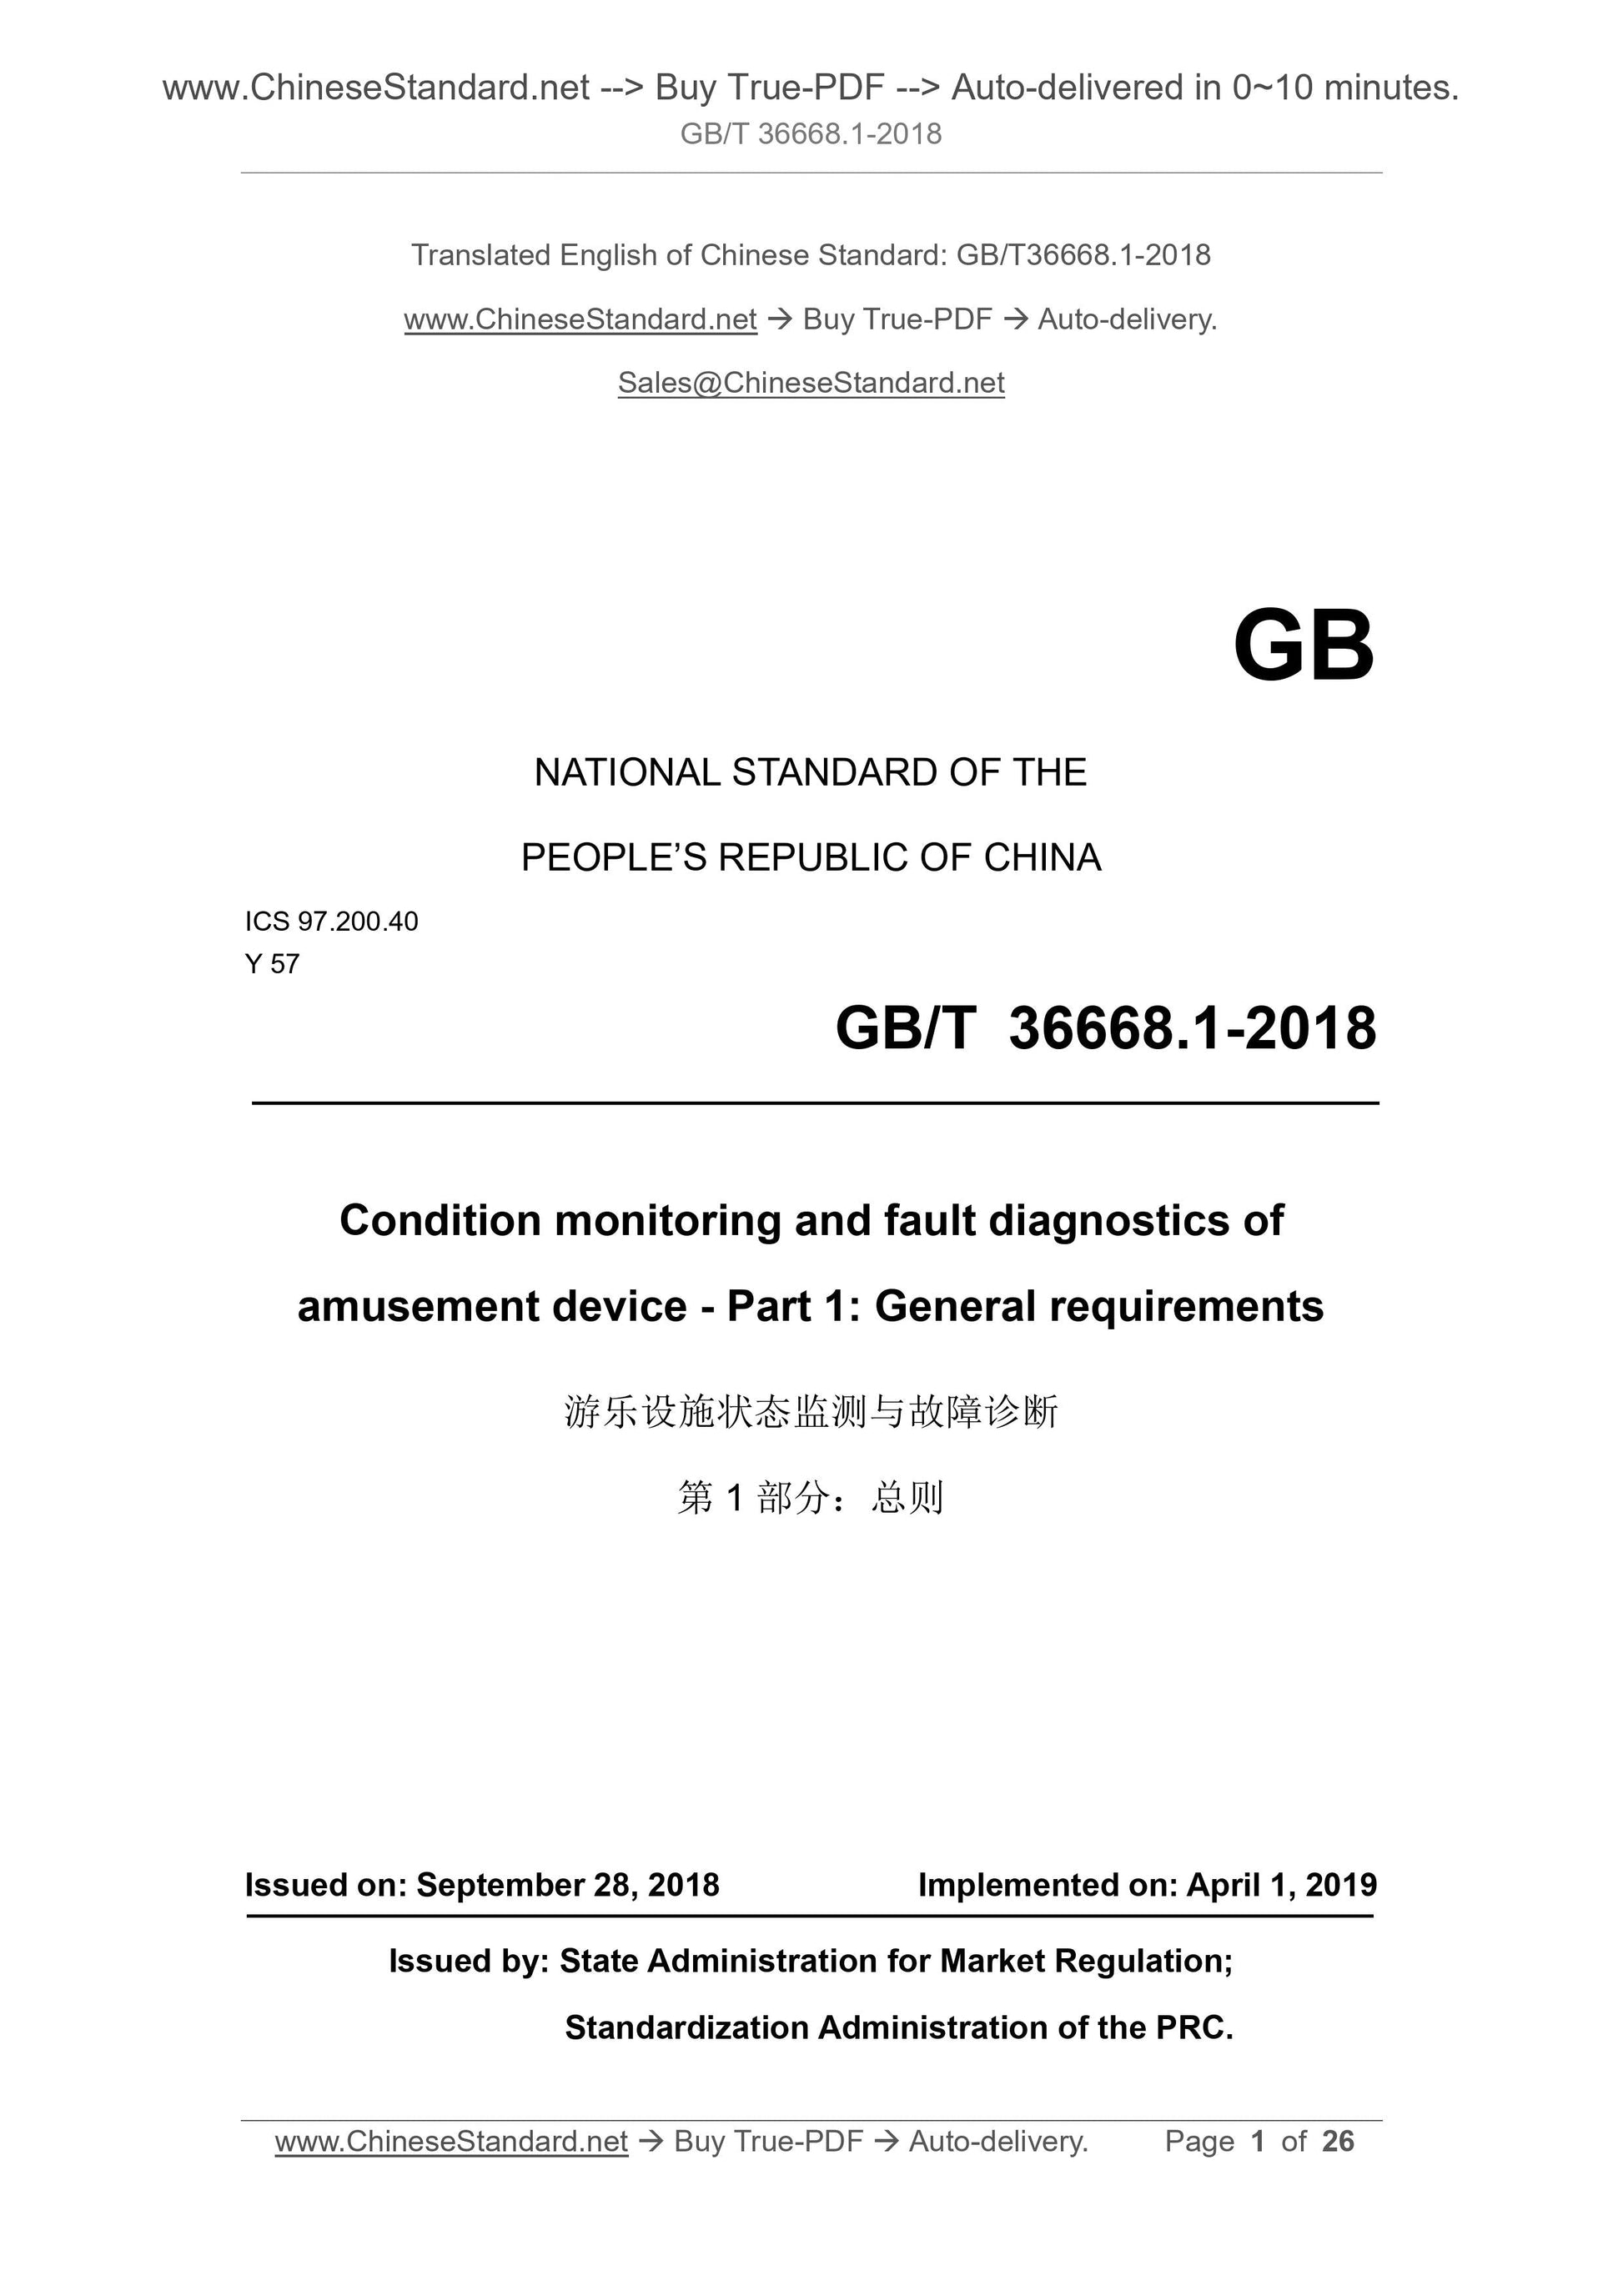 GB/T 36668.1-2018 Page 1